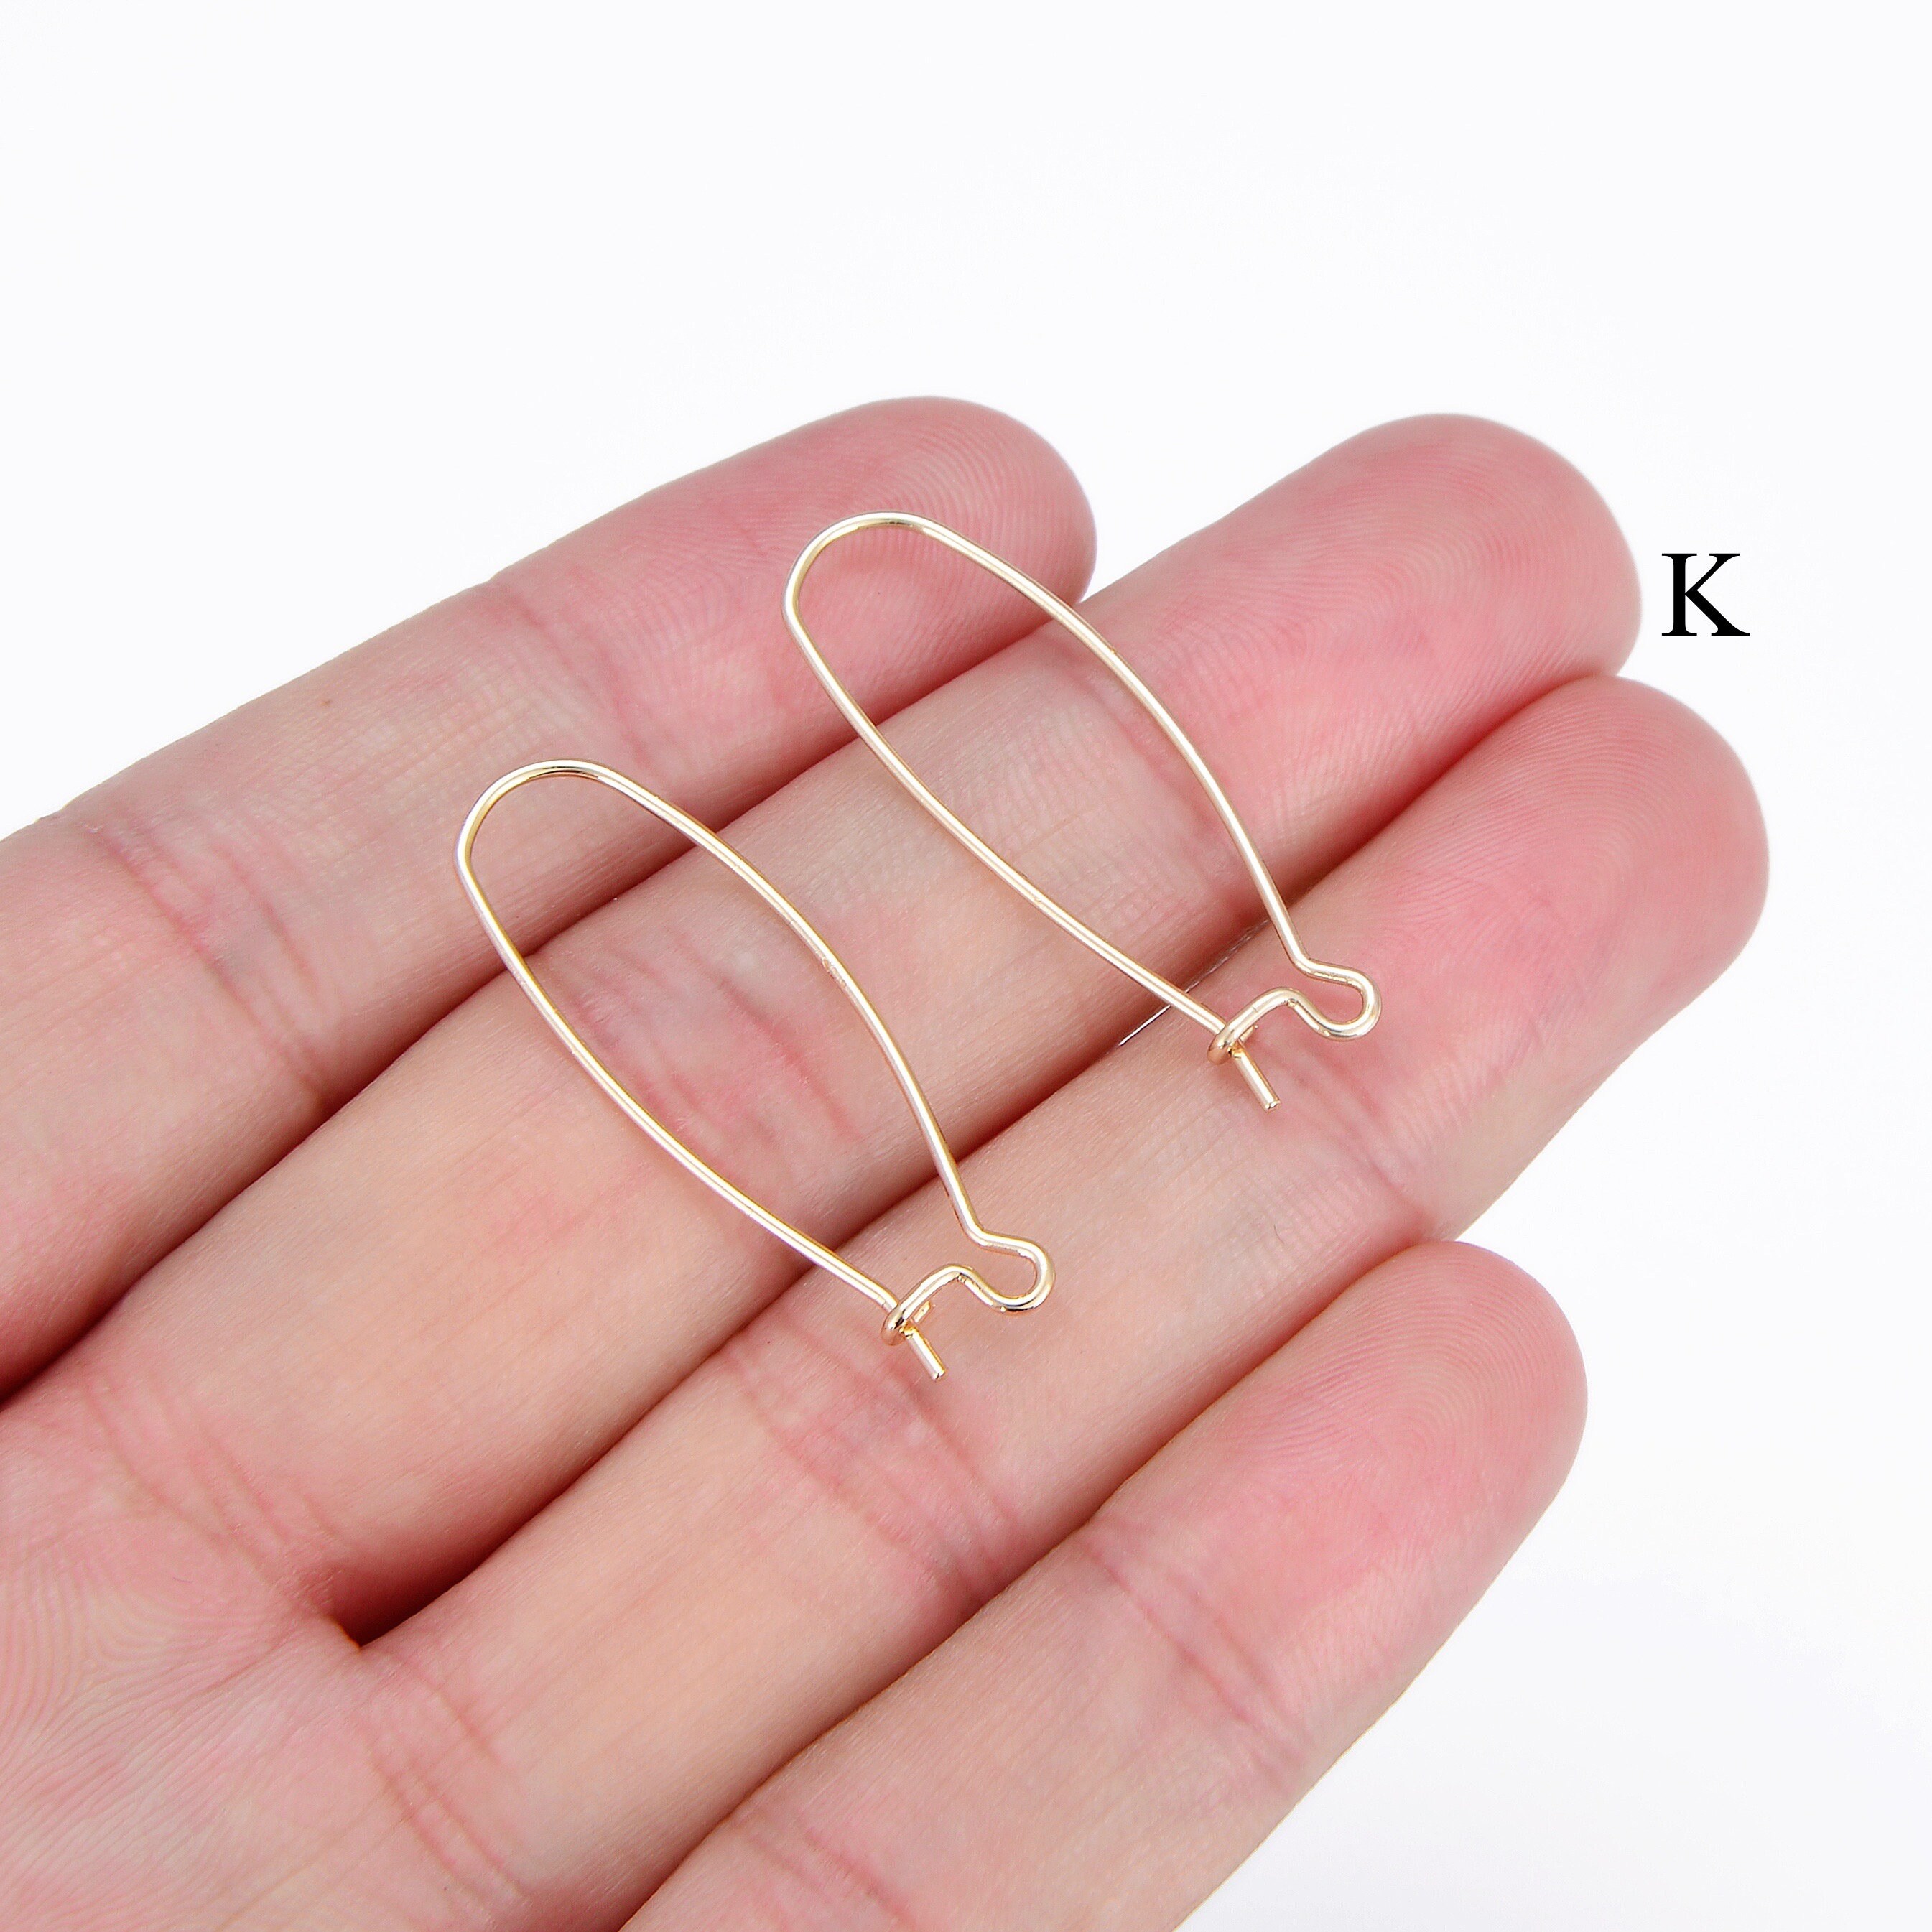 100-200 DIY Jewelry Making Findings Earring Hook Coil Ear Wire French Hook Alloy in Gold | One Size